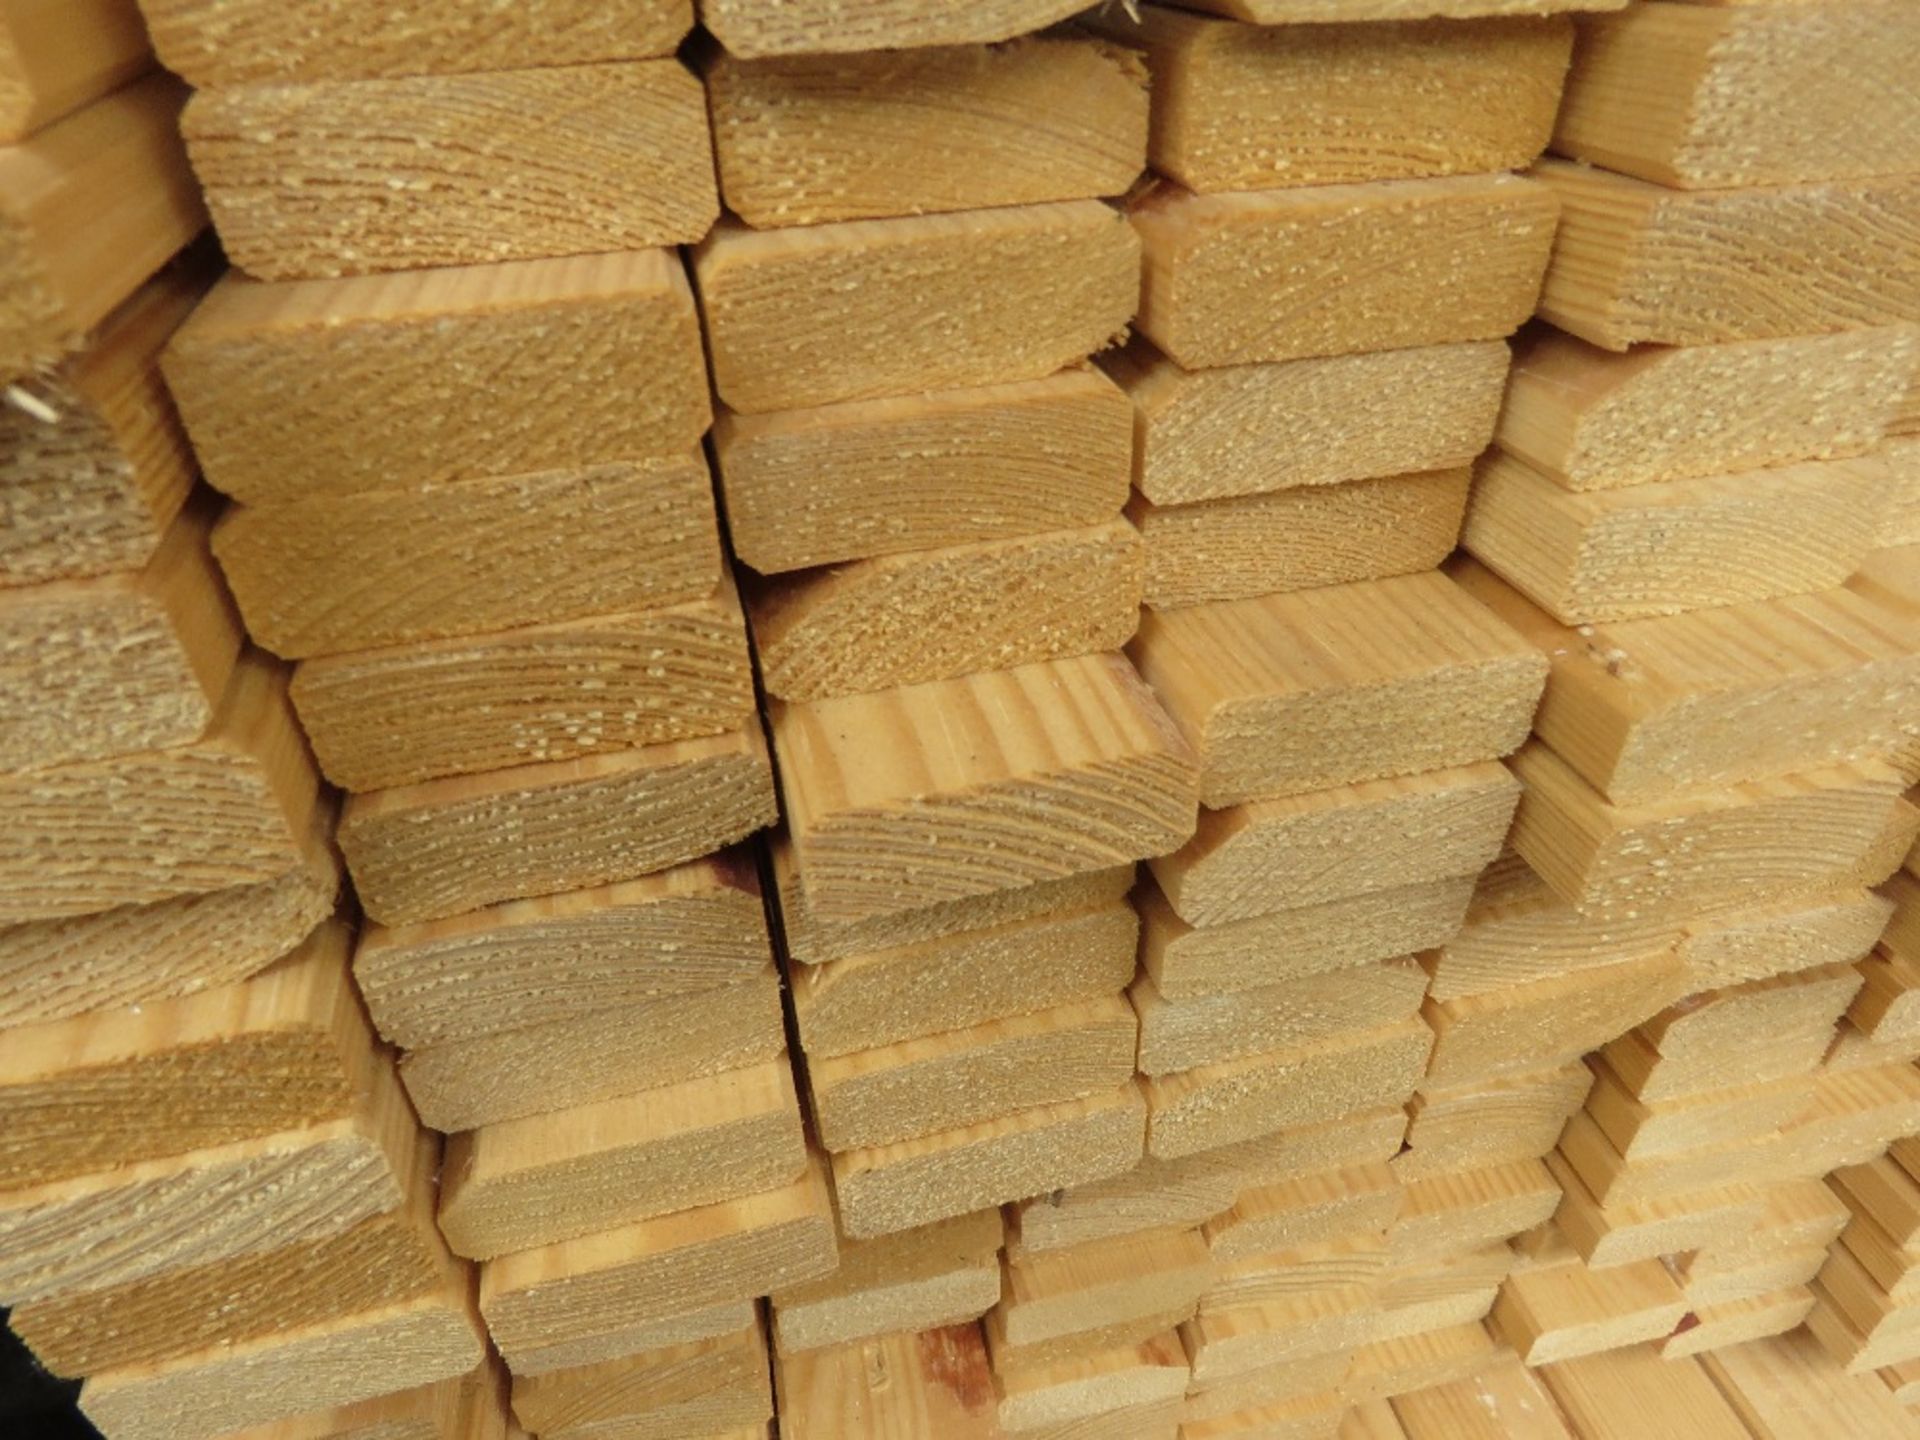 EXTRA LARGE PACK OF UNTREATED VENETIAN FENCE / TRELLIS TIMBER SLATS 1.42M LENGTH X 45MM X 17MM APPRO - Image 2 of 3